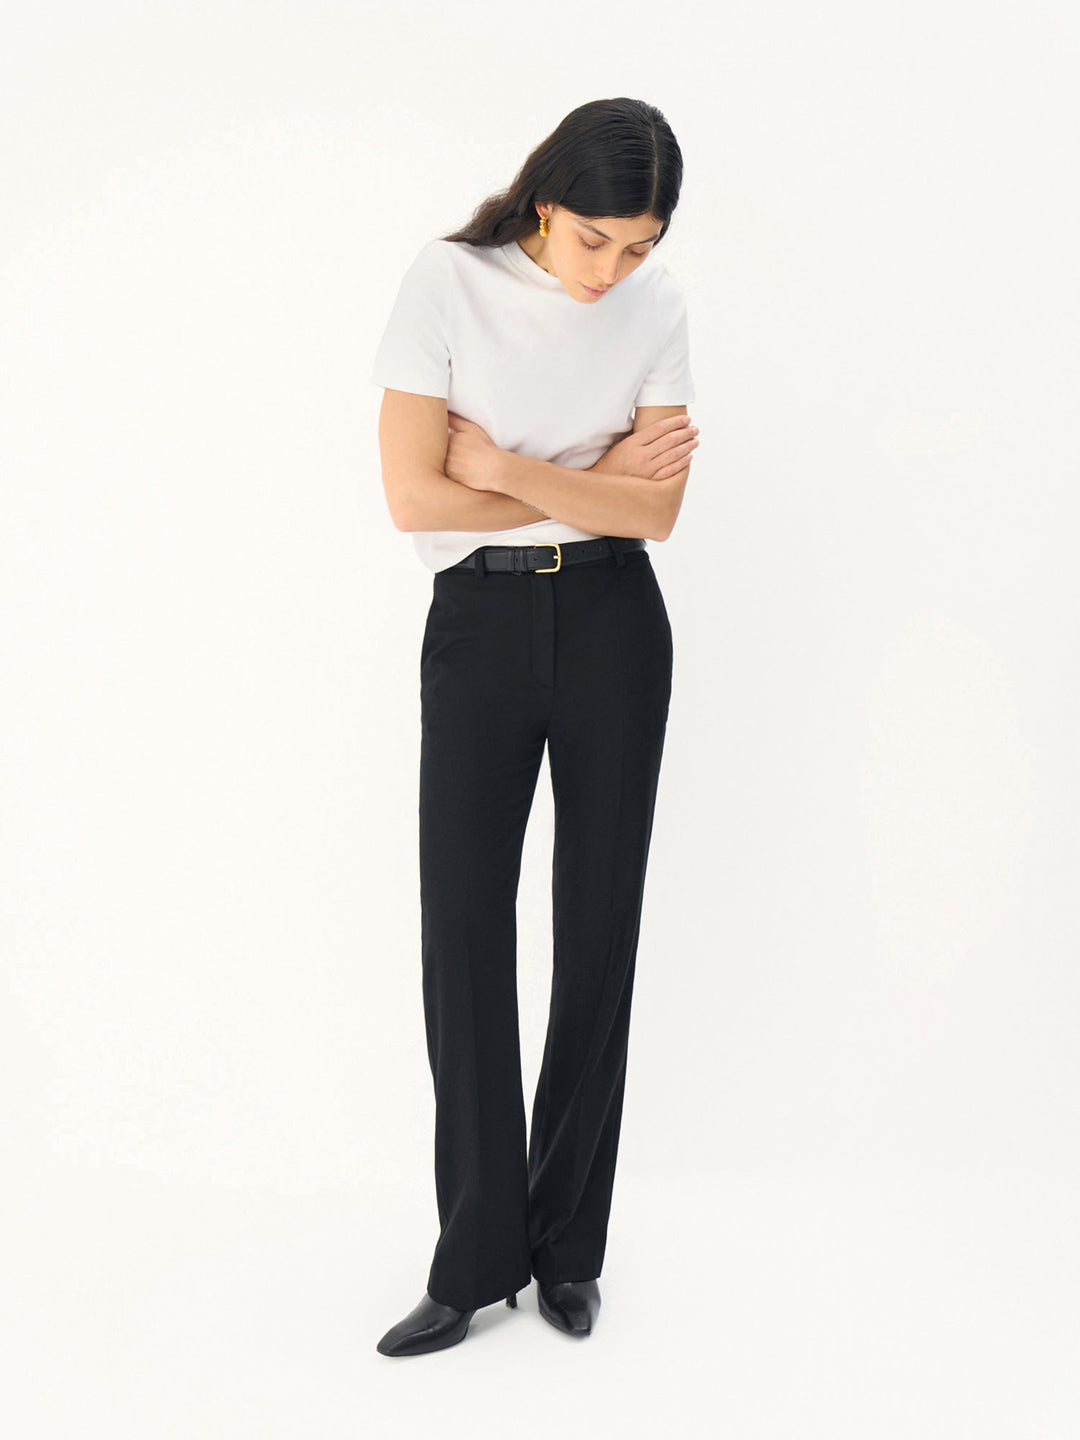 Women - Wool - Cashmere - Classic - Fitted - Pants - Black